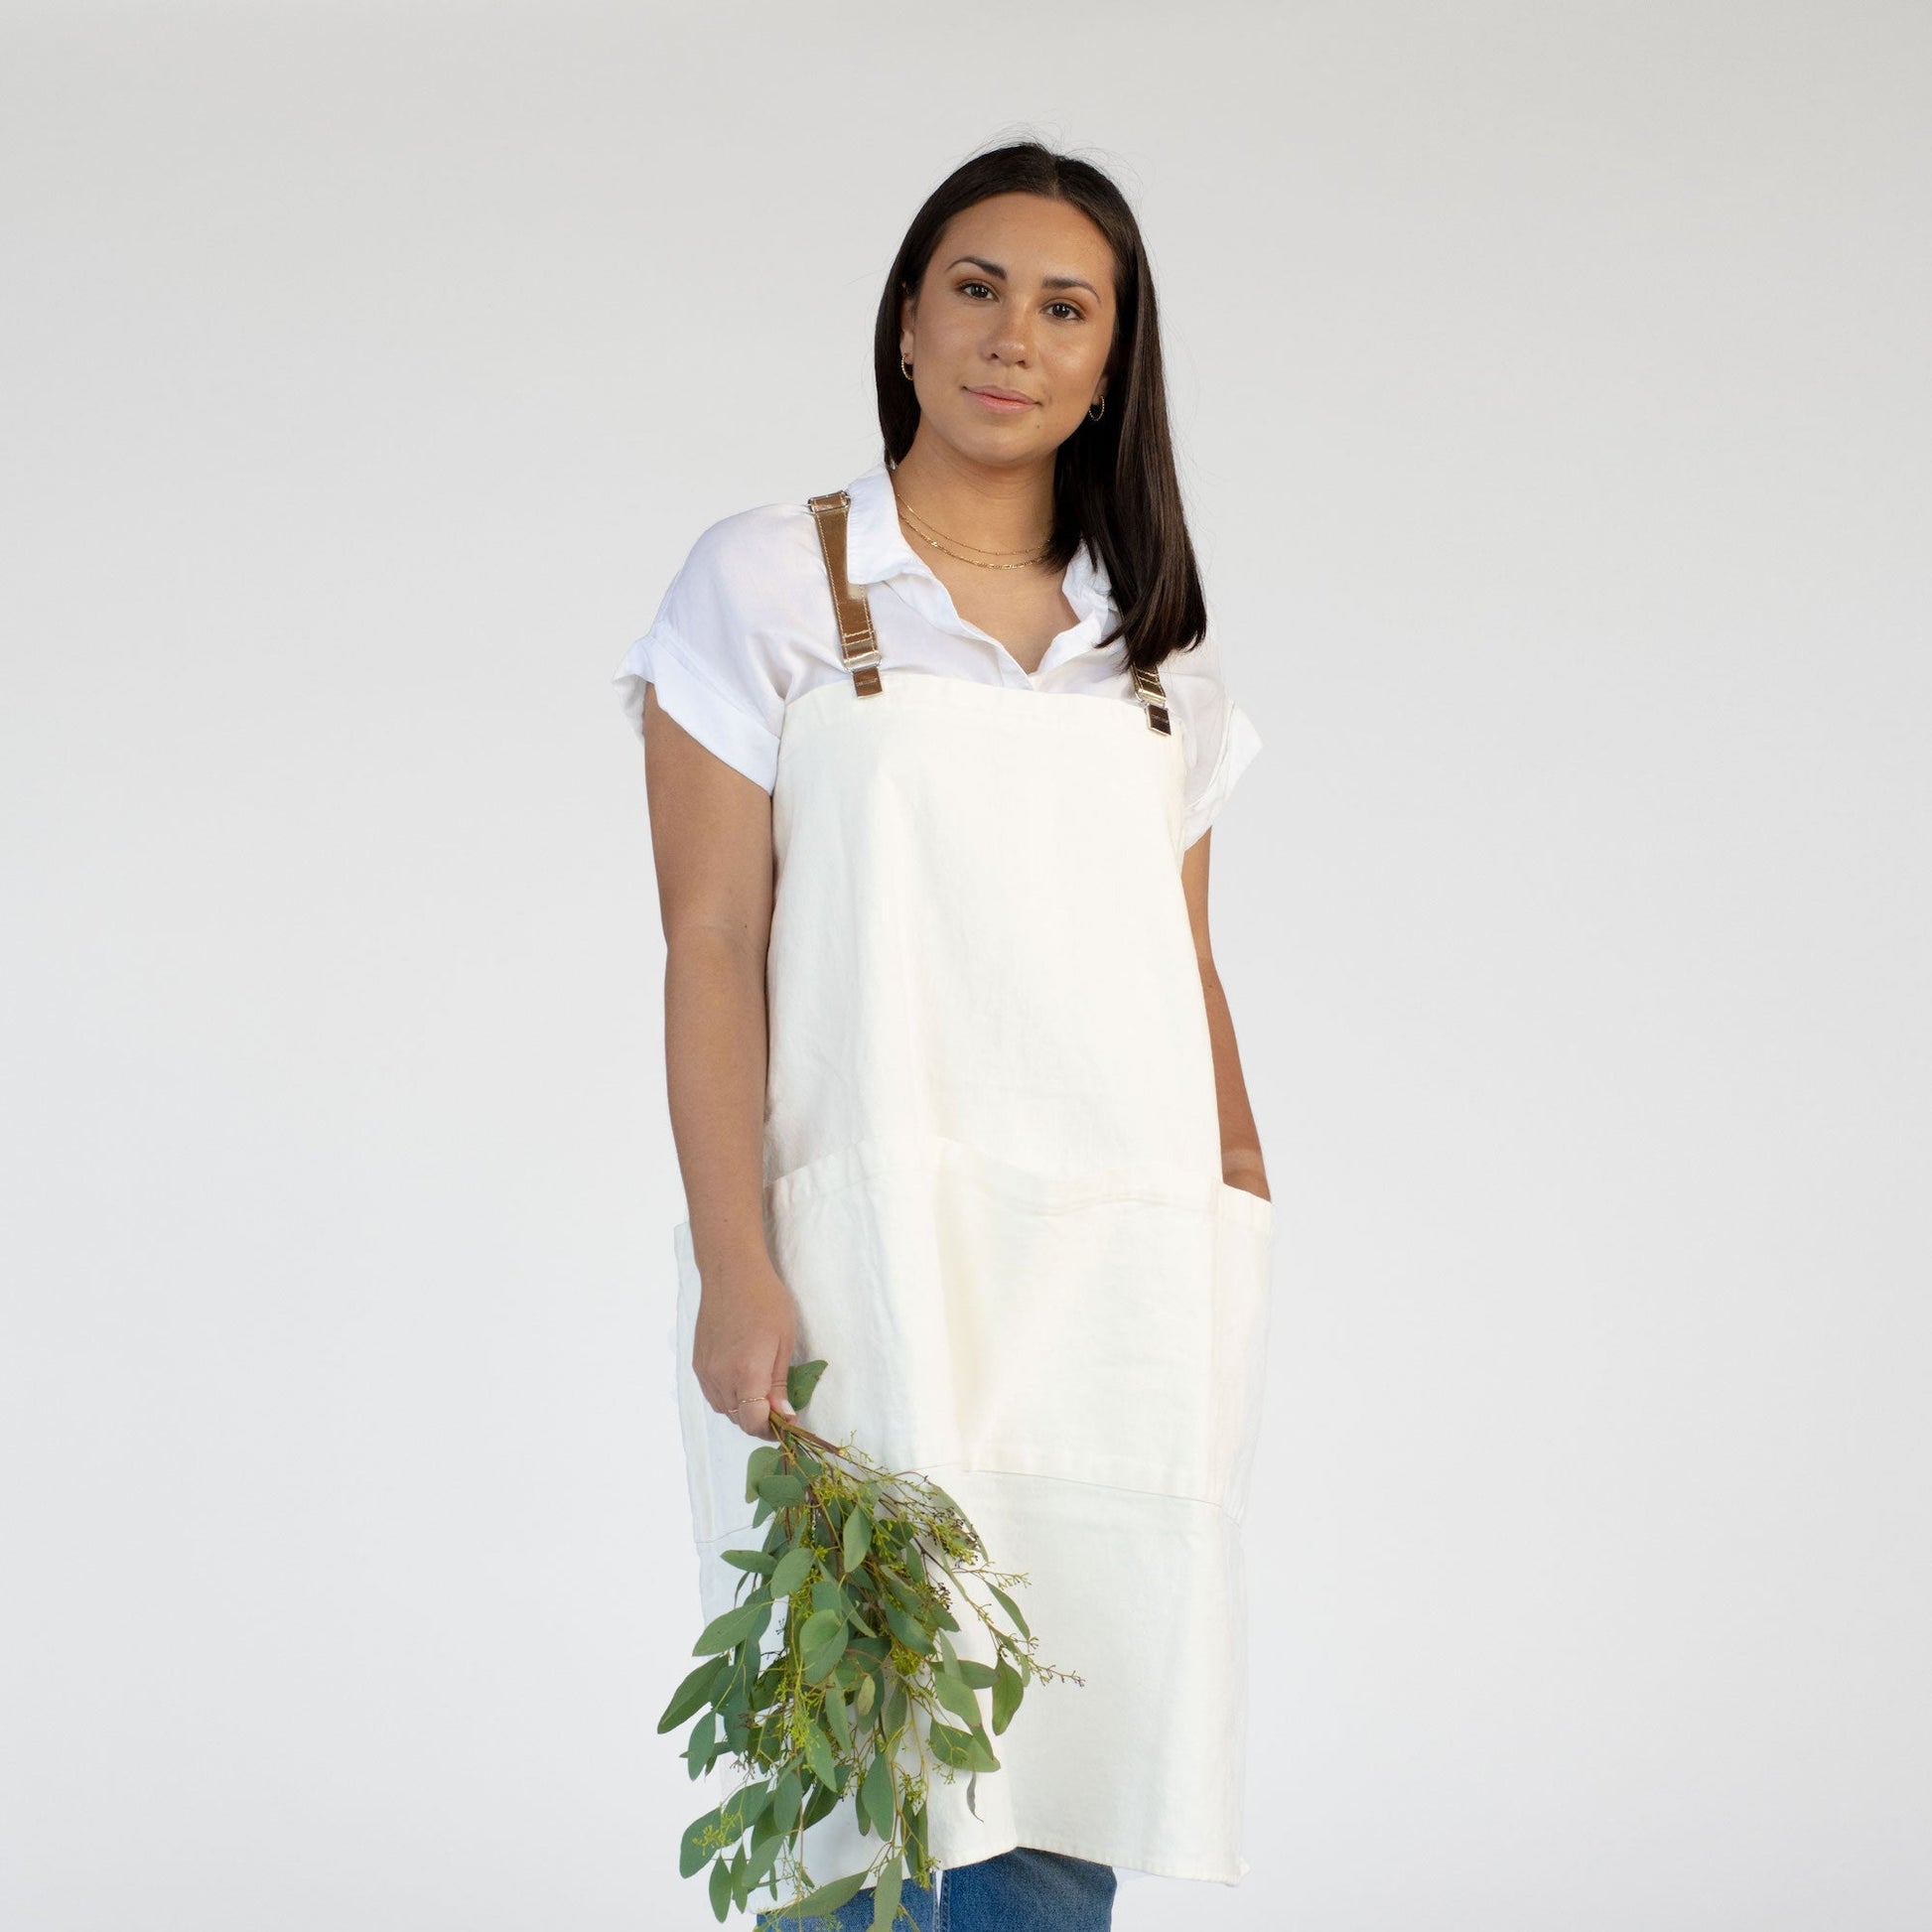 A woman is shown from the front holding a bunch of flowers. She is wearing a white shirt and a cream washable paper apron with gold metallic washable paper straps.